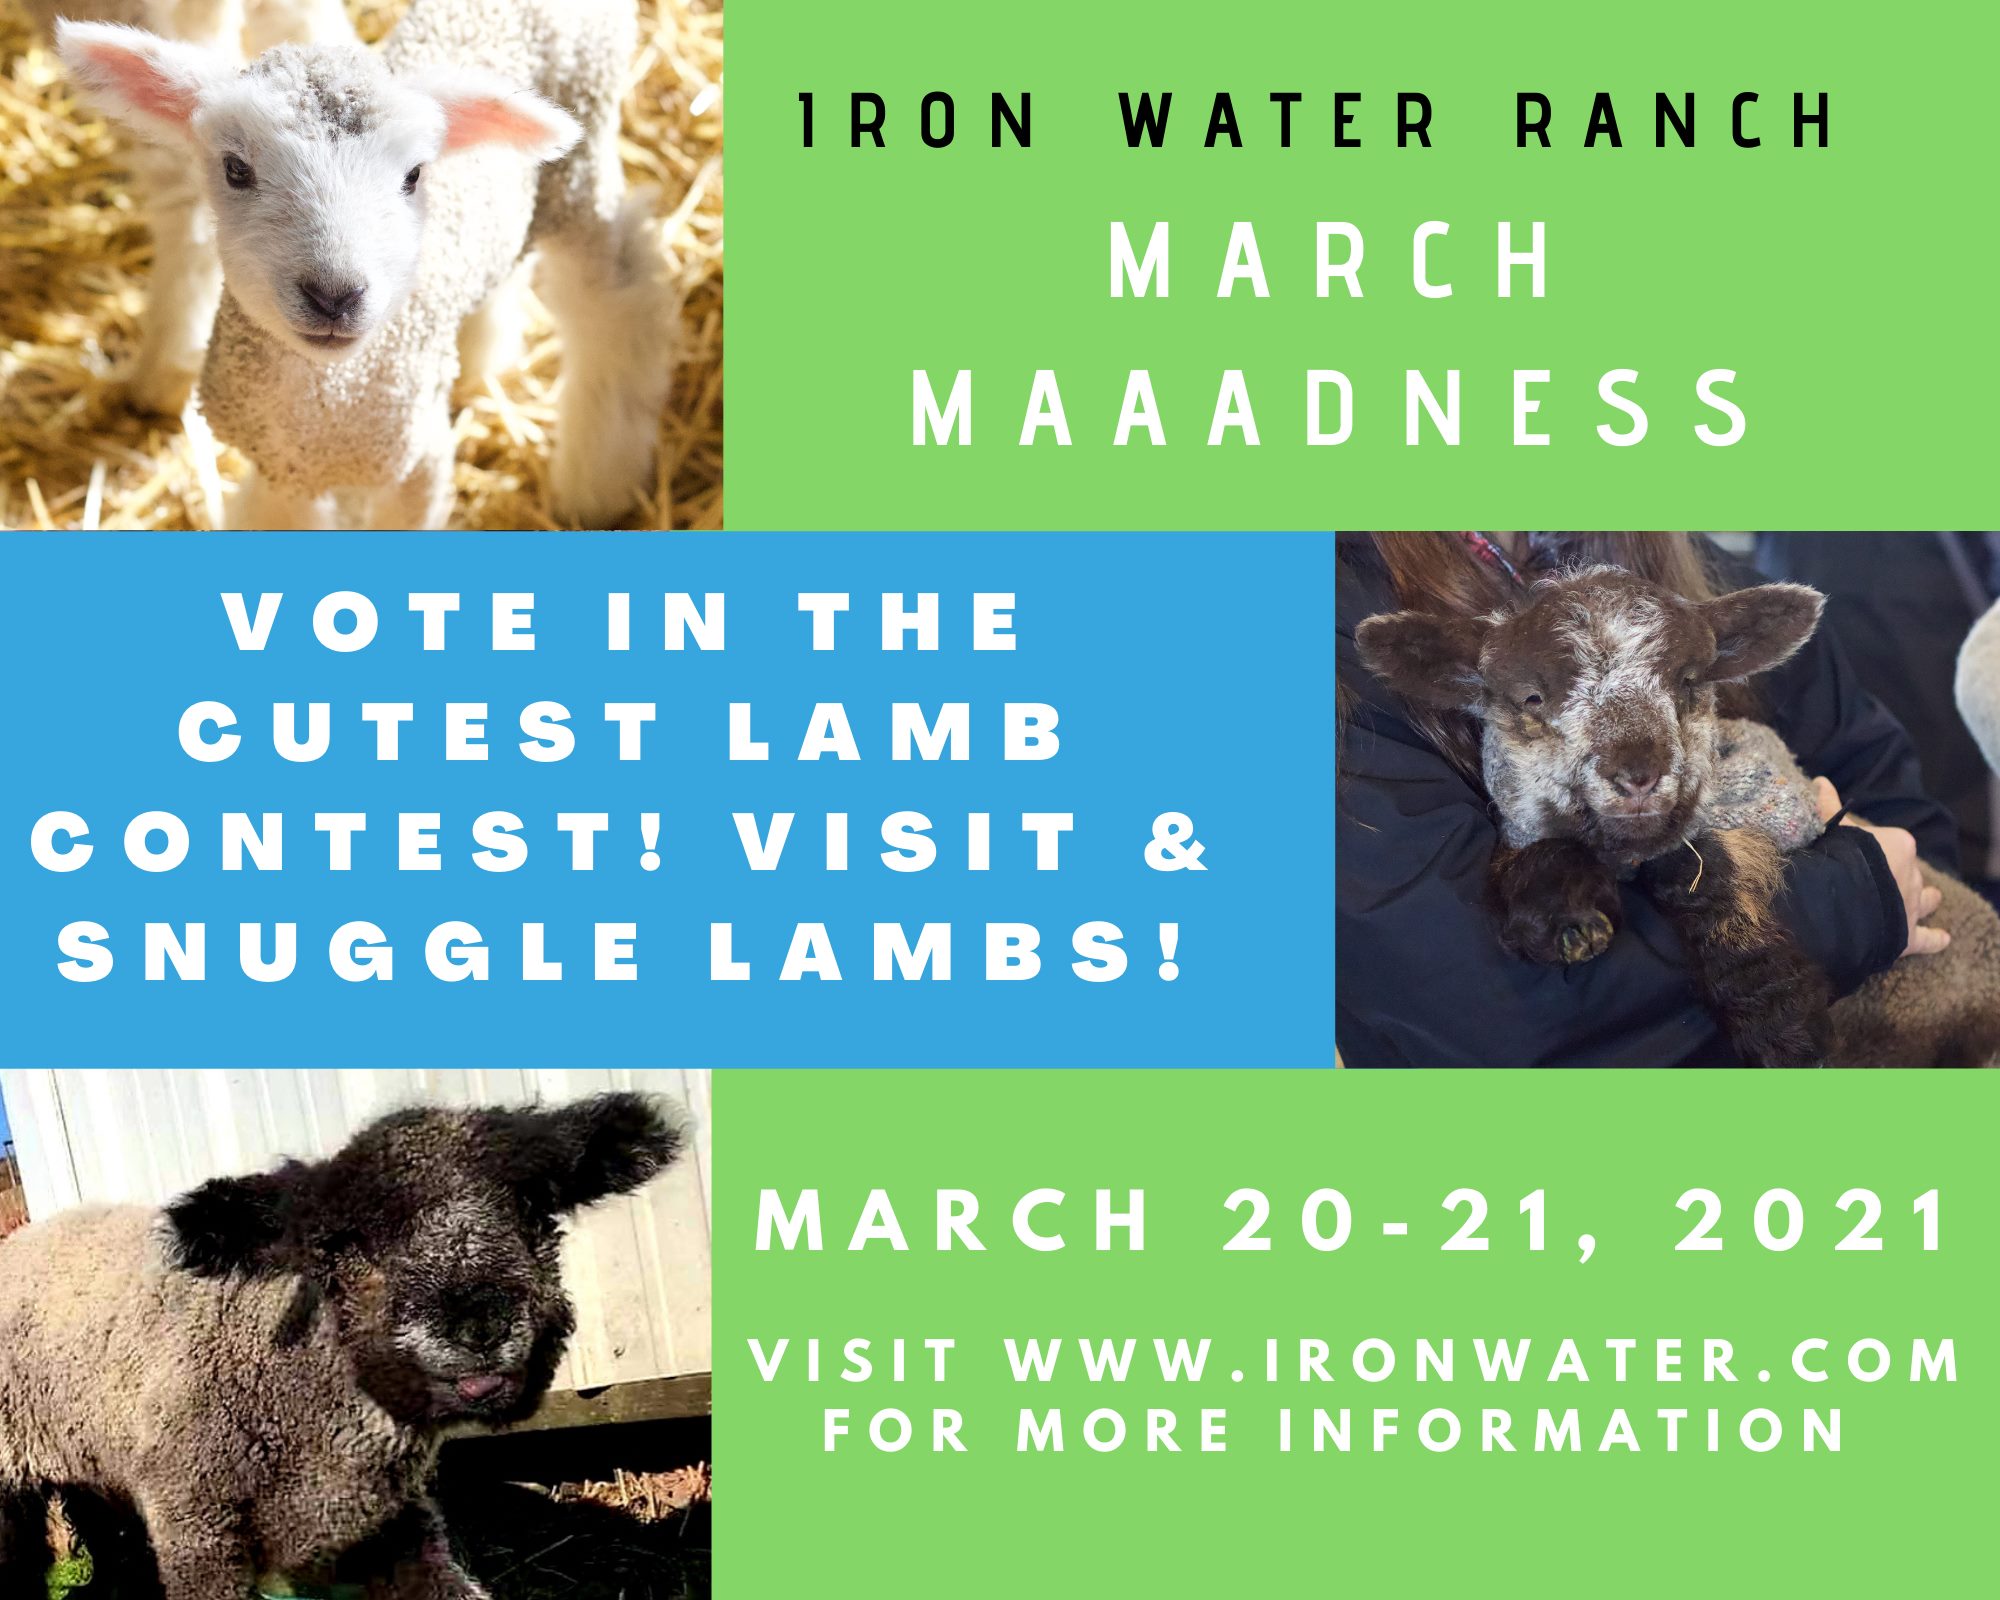 photos of lambs and event information